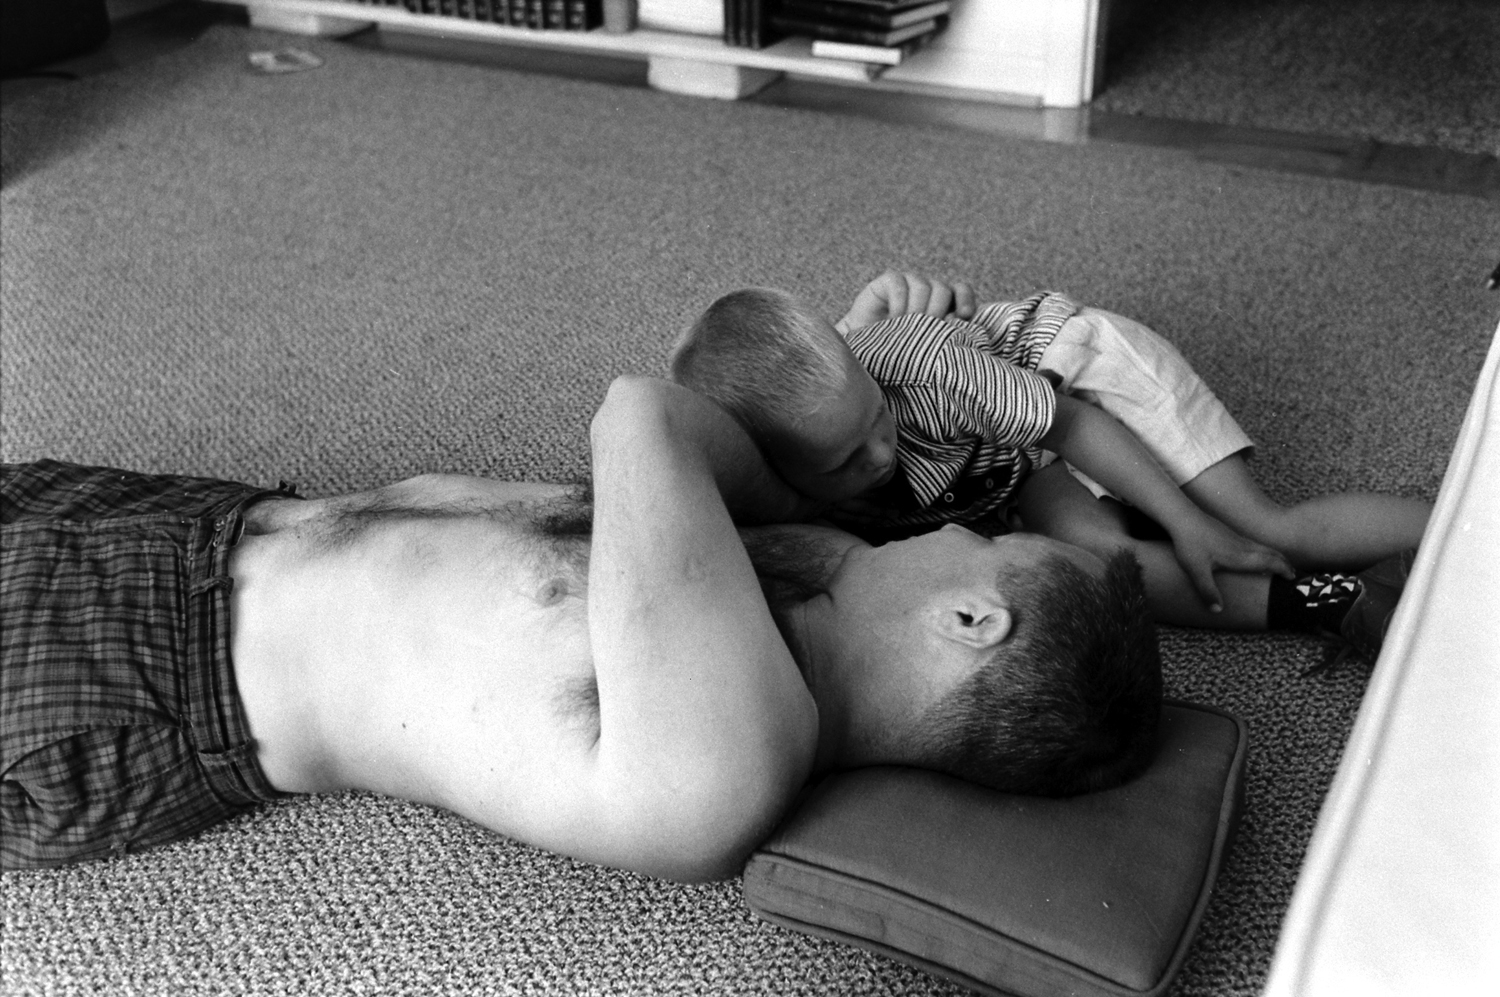 Gus Grissom at home with his son.